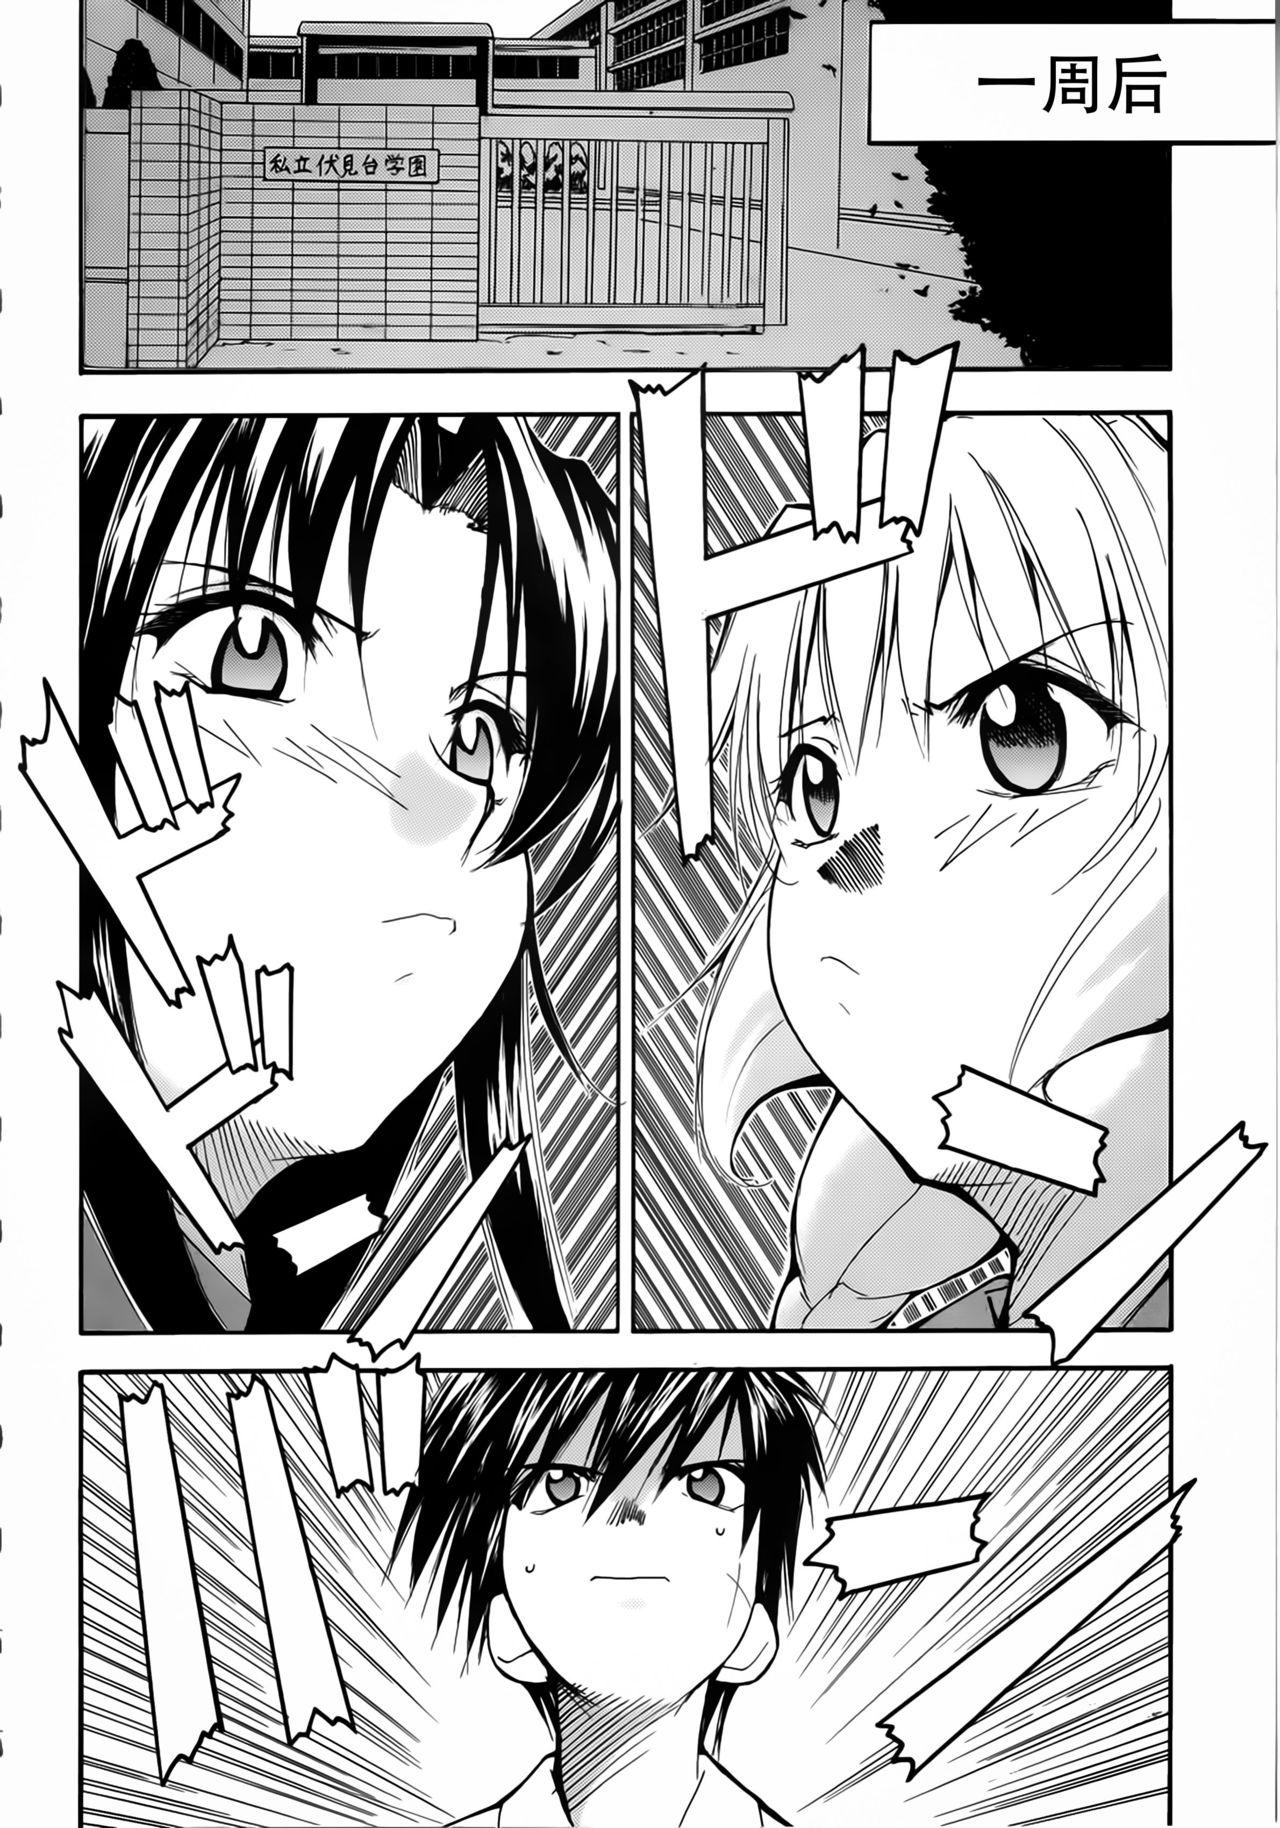 Busty FULL METAL 2 - Full metal panic Publico - Page 9